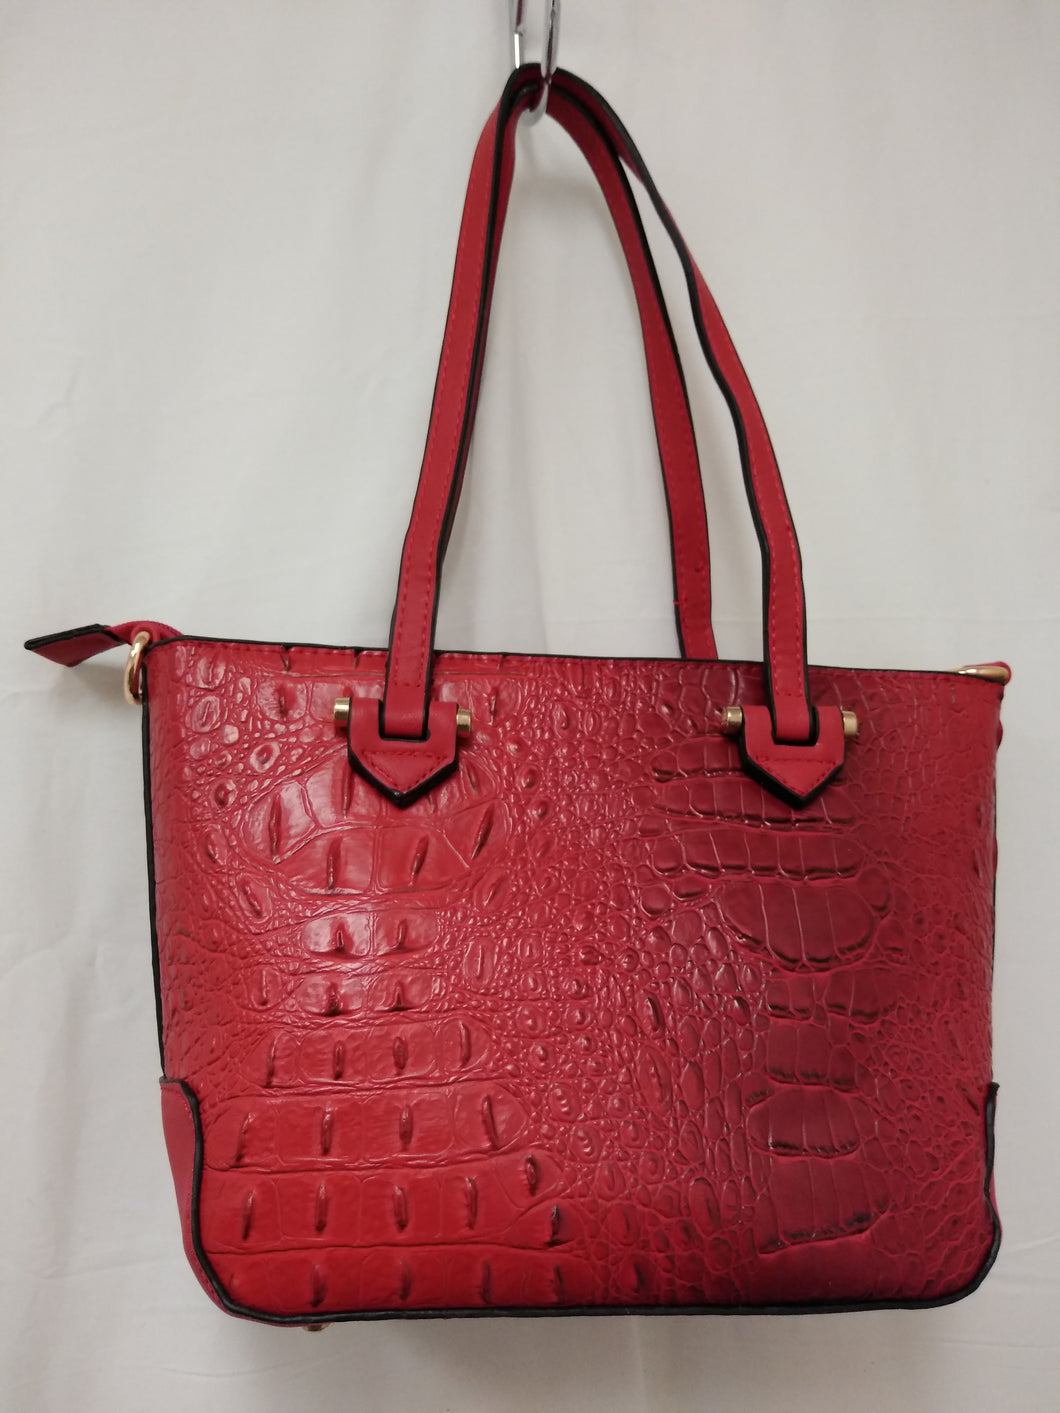 Women's Small Red textured Shoulder Bag Purse